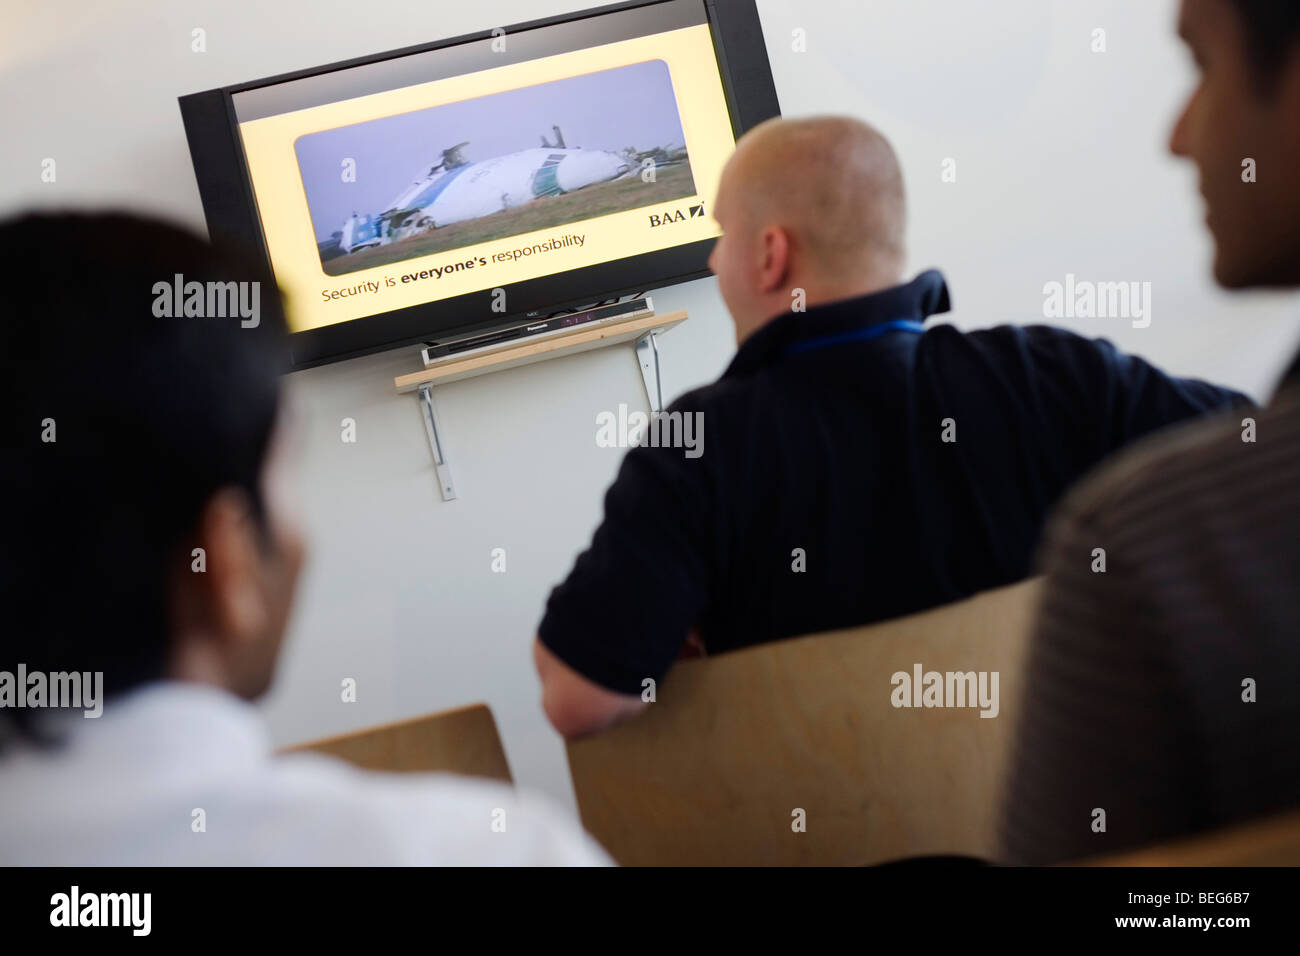 BAA staff watching security awareness film while awaiting issue of security passes at Heathrow airport. Stock Photo